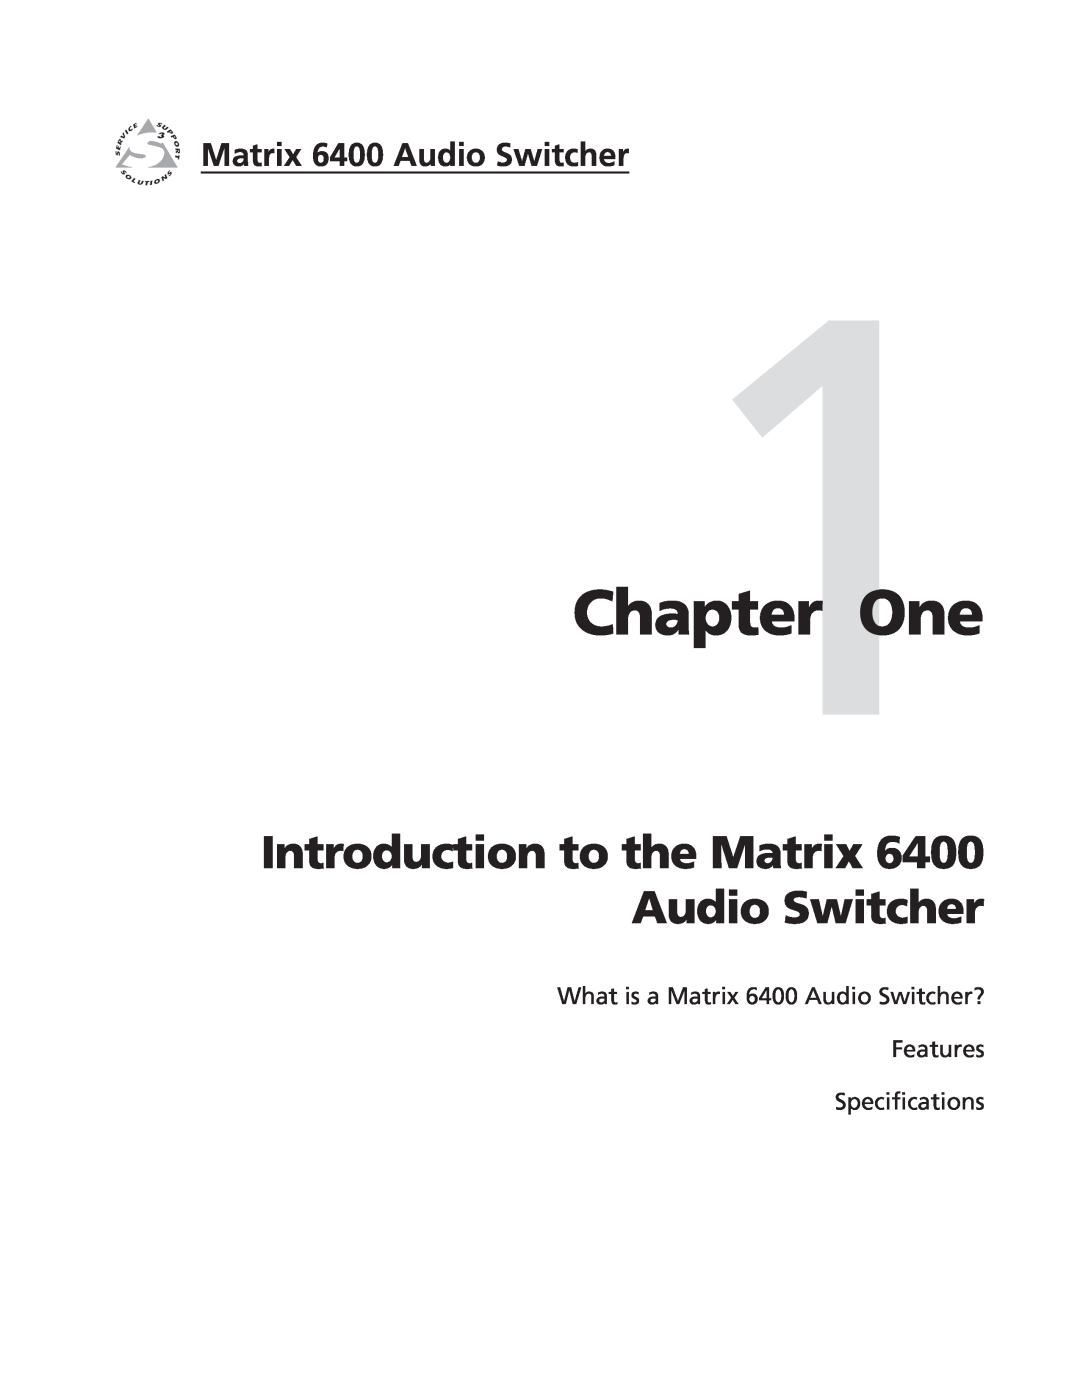 Extron electronic 3200s manual One, Introduction to the Matrix 6400 Audio Switcher 